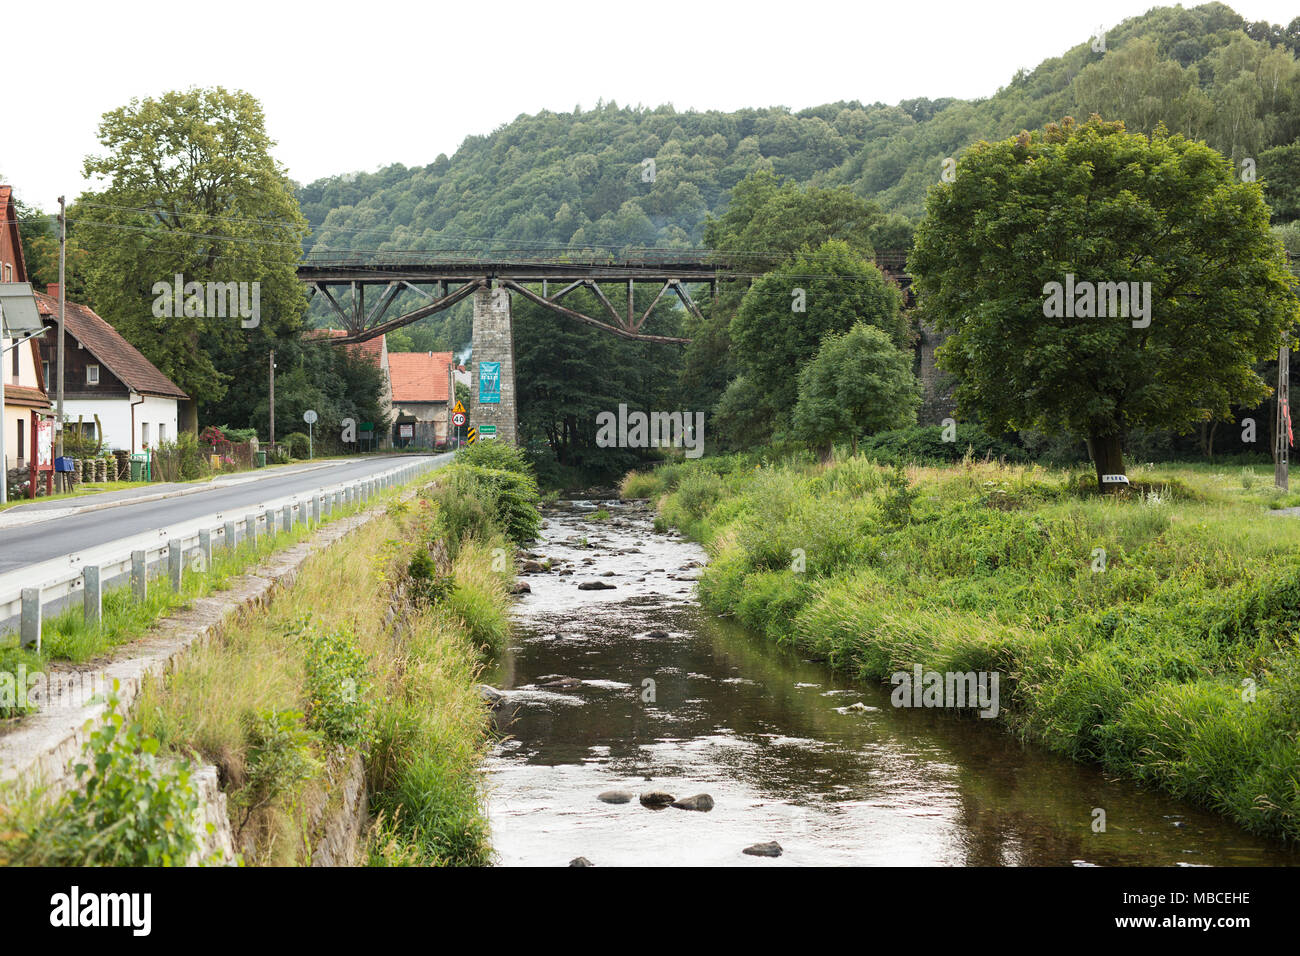 The Bystrzyca river runs under the viaduct on a summer evening in Jugowice, Poland. Stock Photo